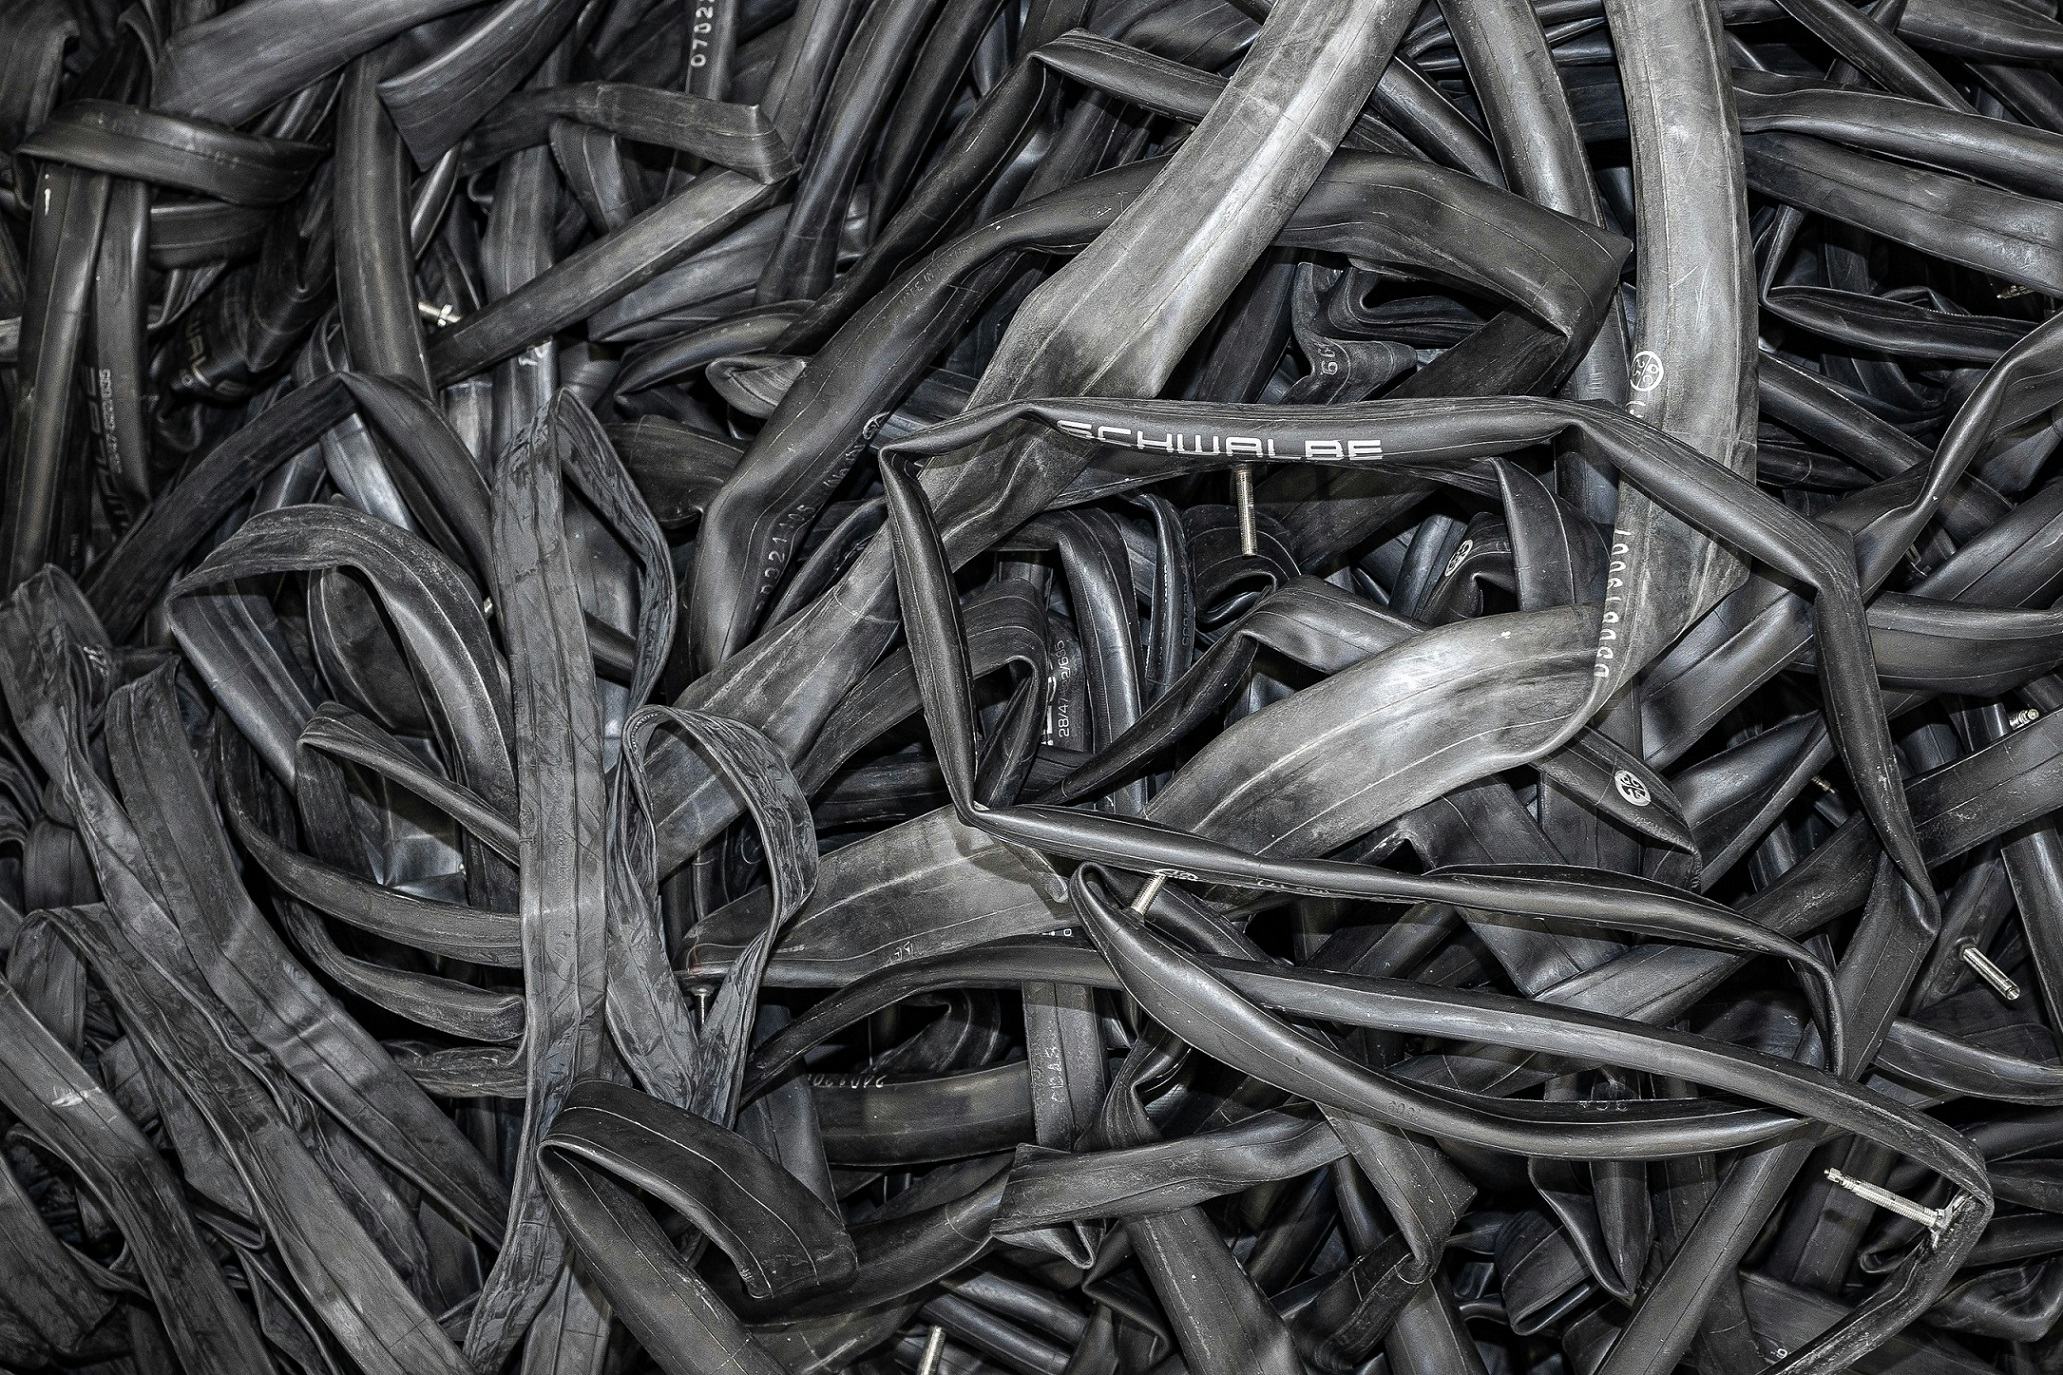 Schwalbe inner tube recycling as a prime example of circular economy